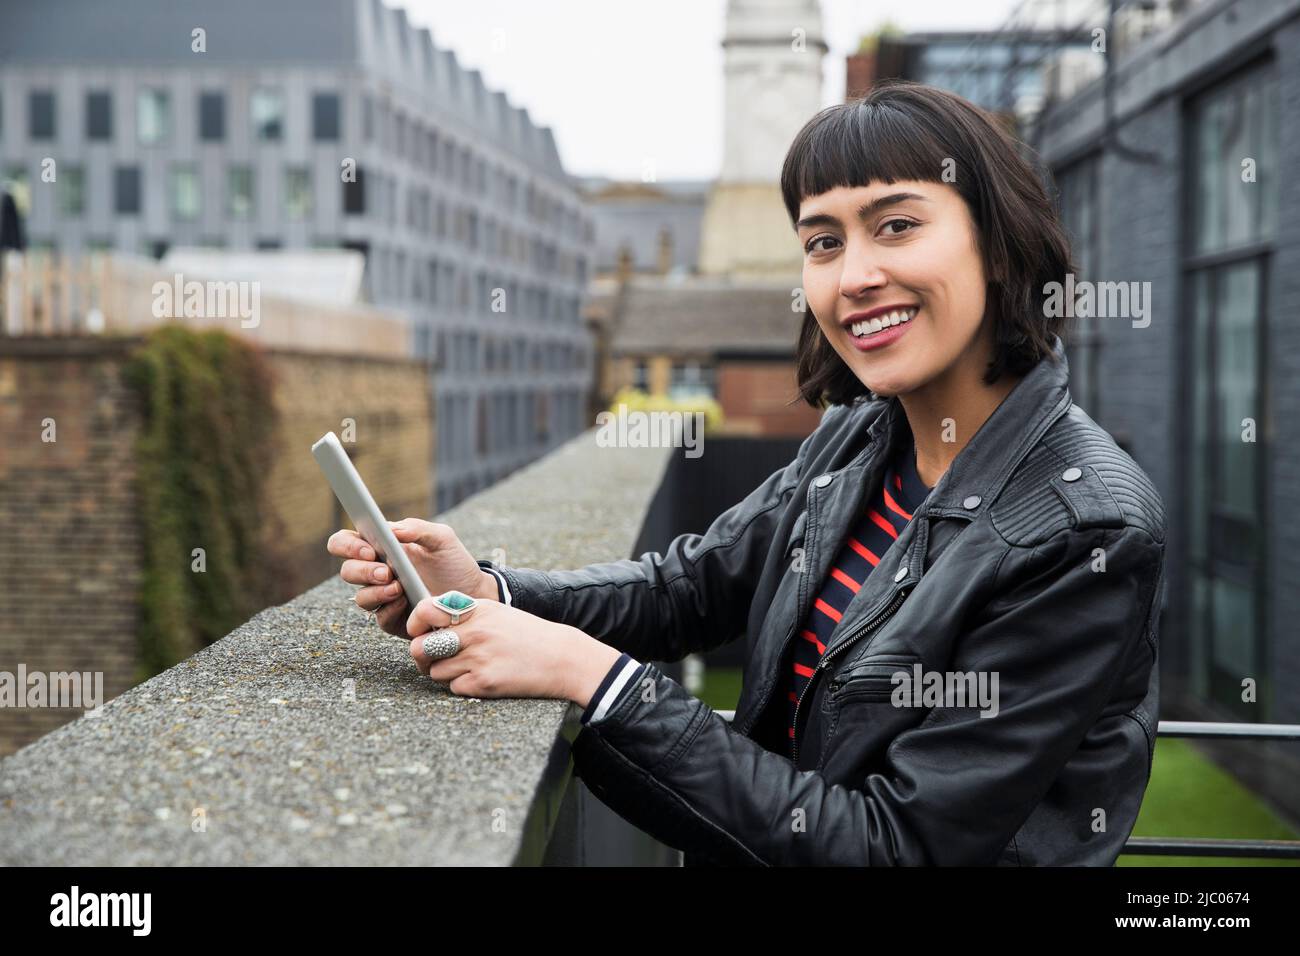 Woman on mobile phone standing at ledge of building on rooftop patio Stock Photo